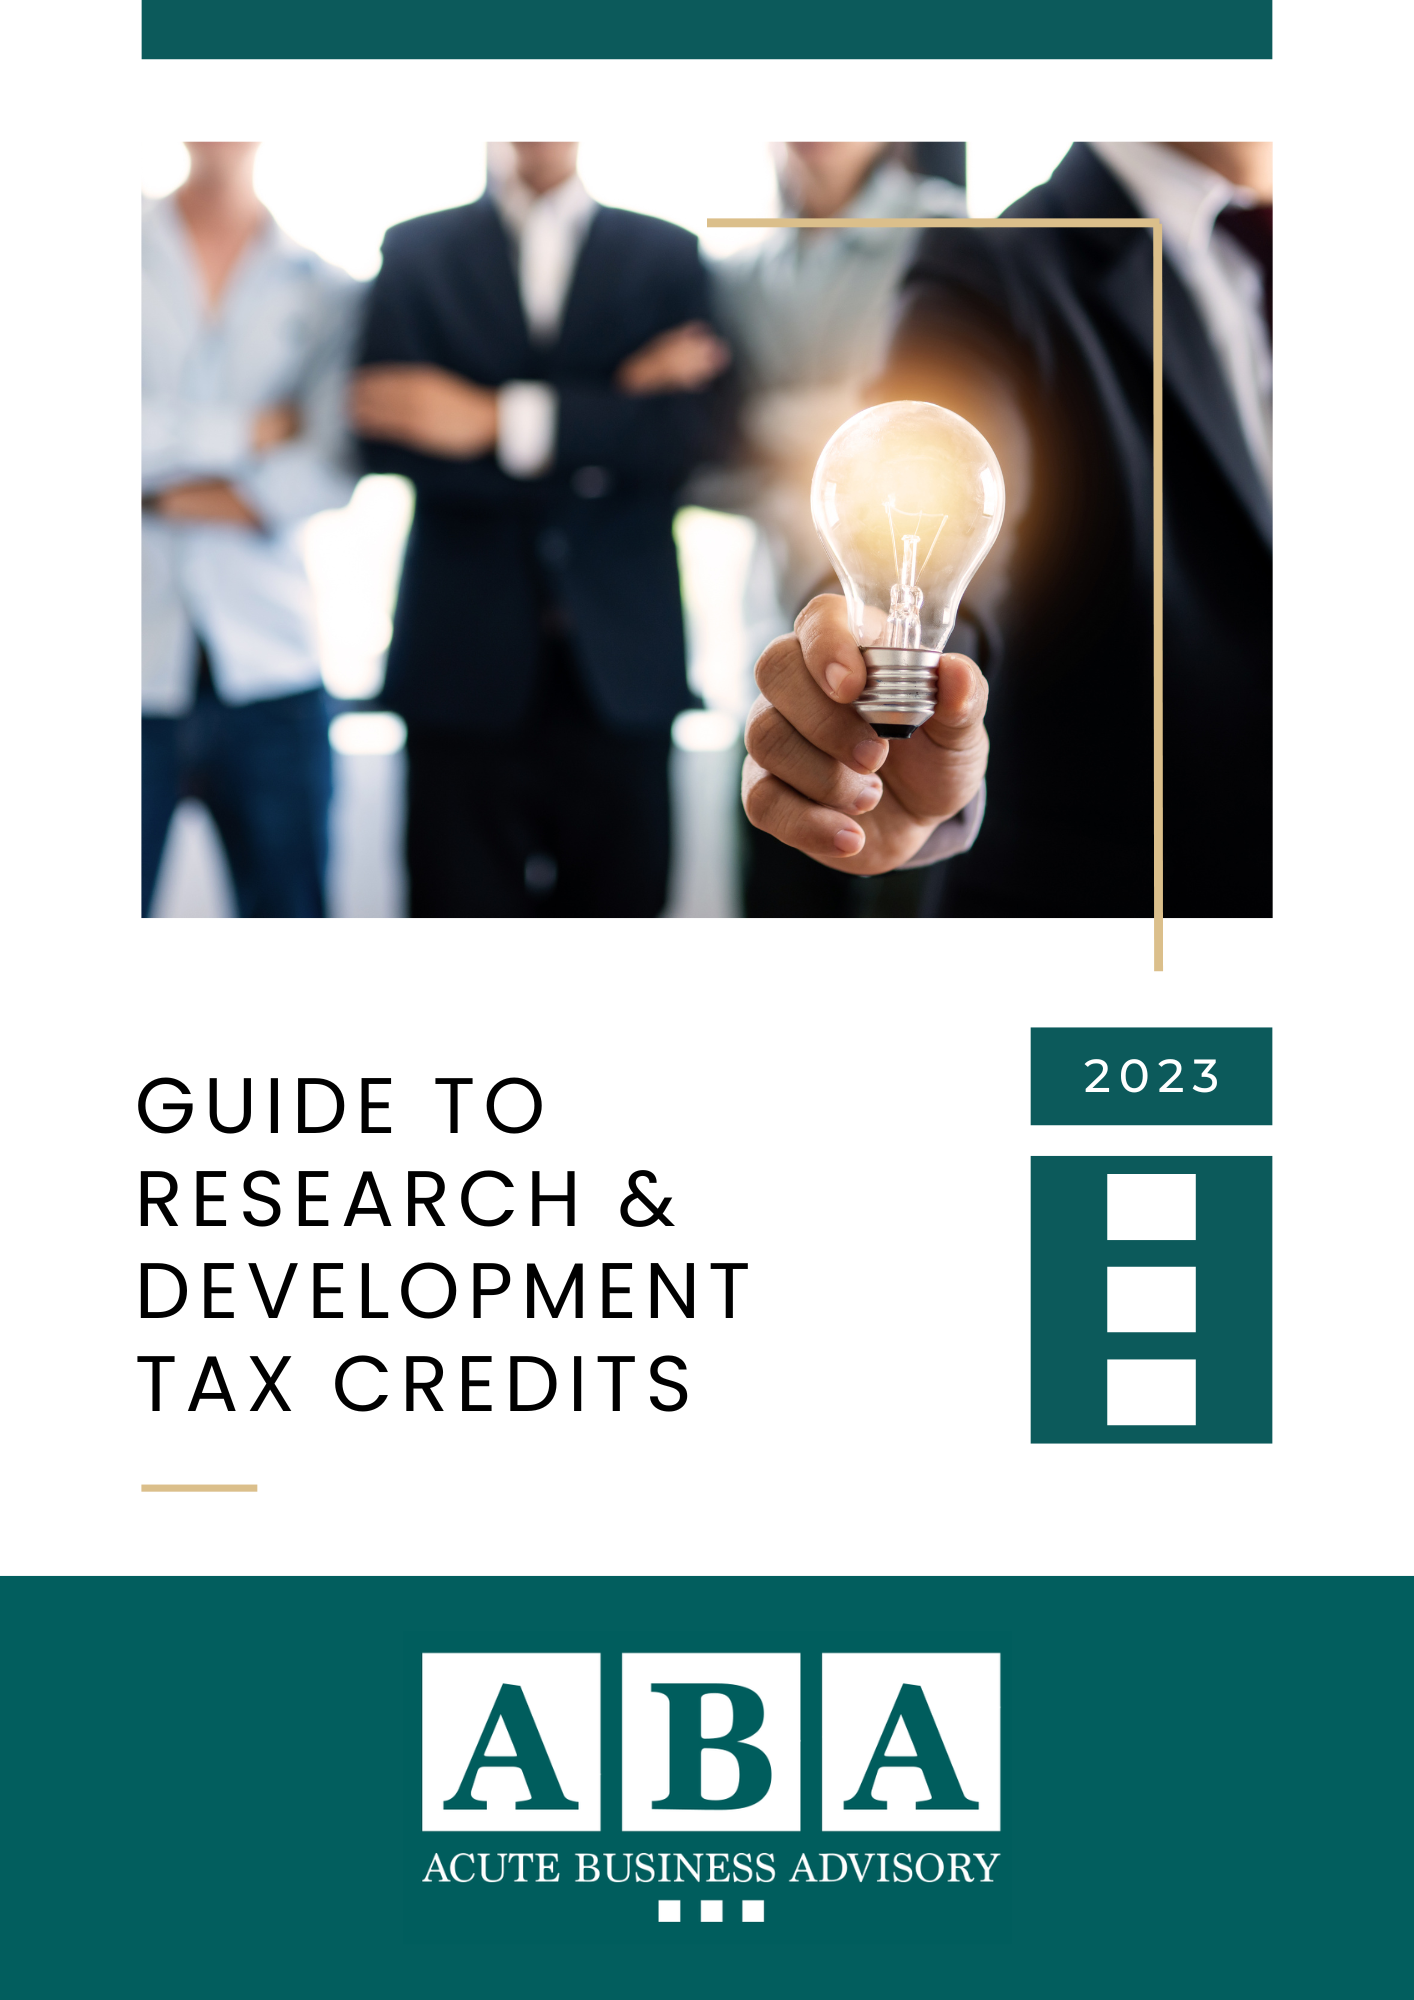 Guide to Research and Development Tax Credits